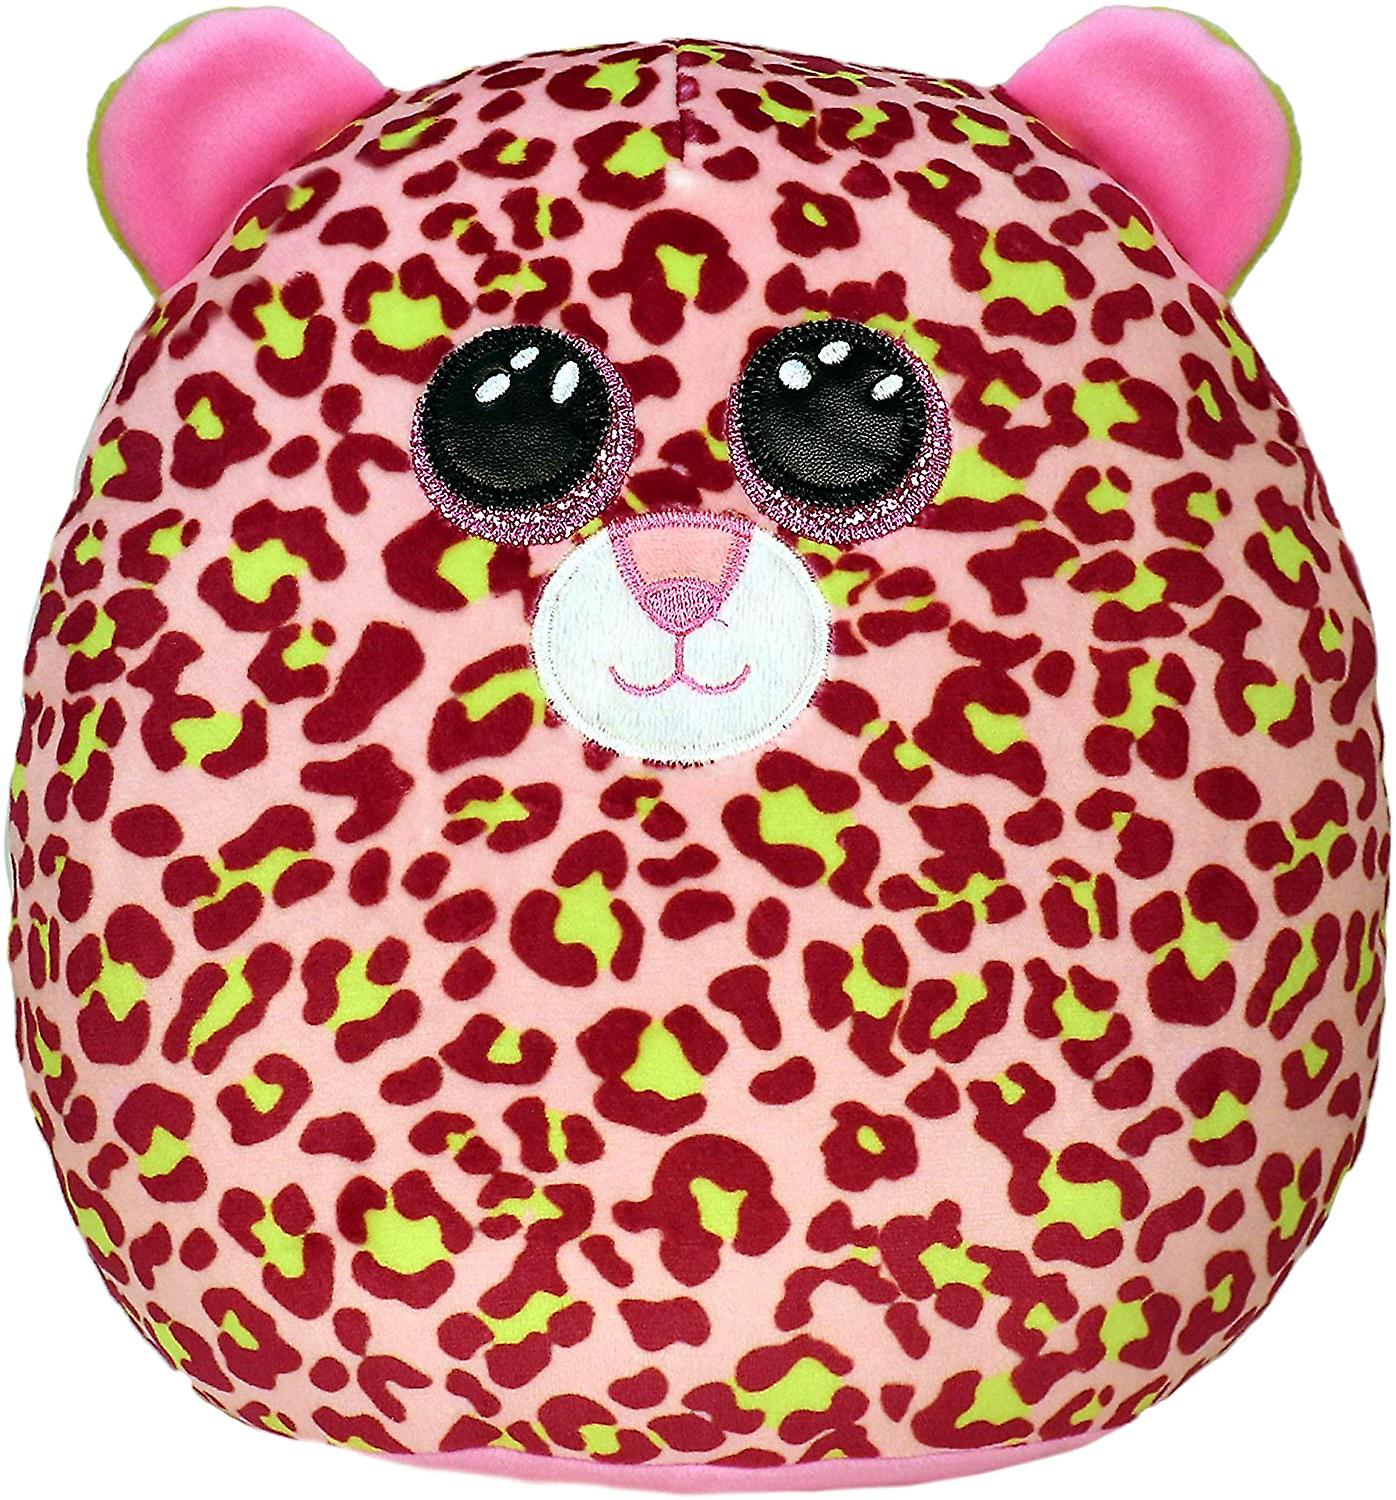 TY Lainey Leopard Squish a Boo 10"